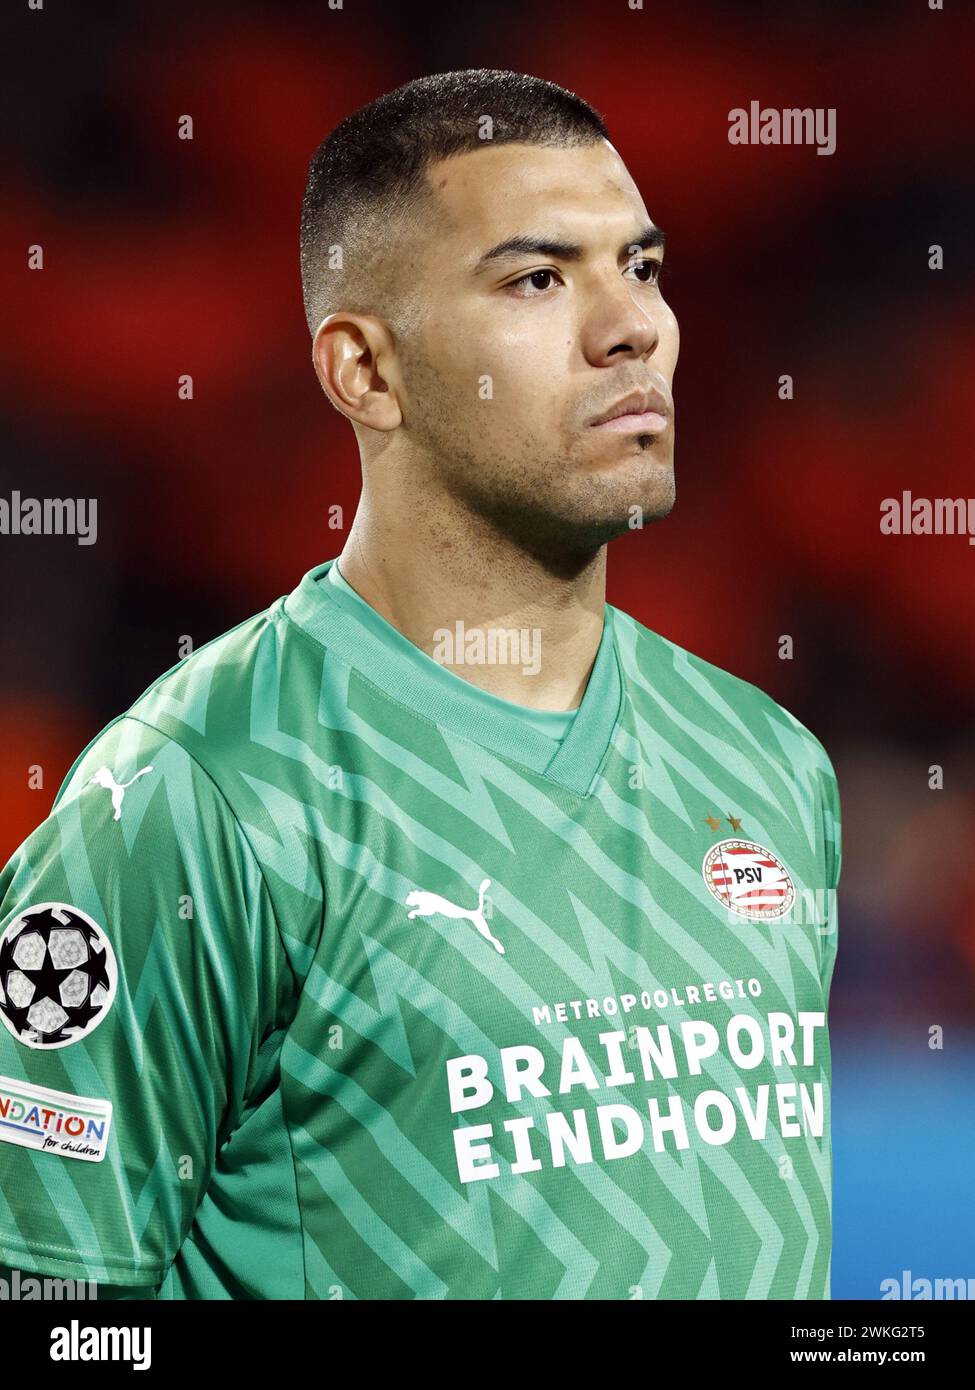 EINDHOVEN - PSV Eindhoven goalkeeper Walter Benitez during the UEFA Champions League round of 16 match between PSV Eindhoven and Borussia Dortmund at the Phillips stadium on February 20, 2024 in Eindhoven, Netherlands. ANP MAURICE VAN STEEN Stock Photo